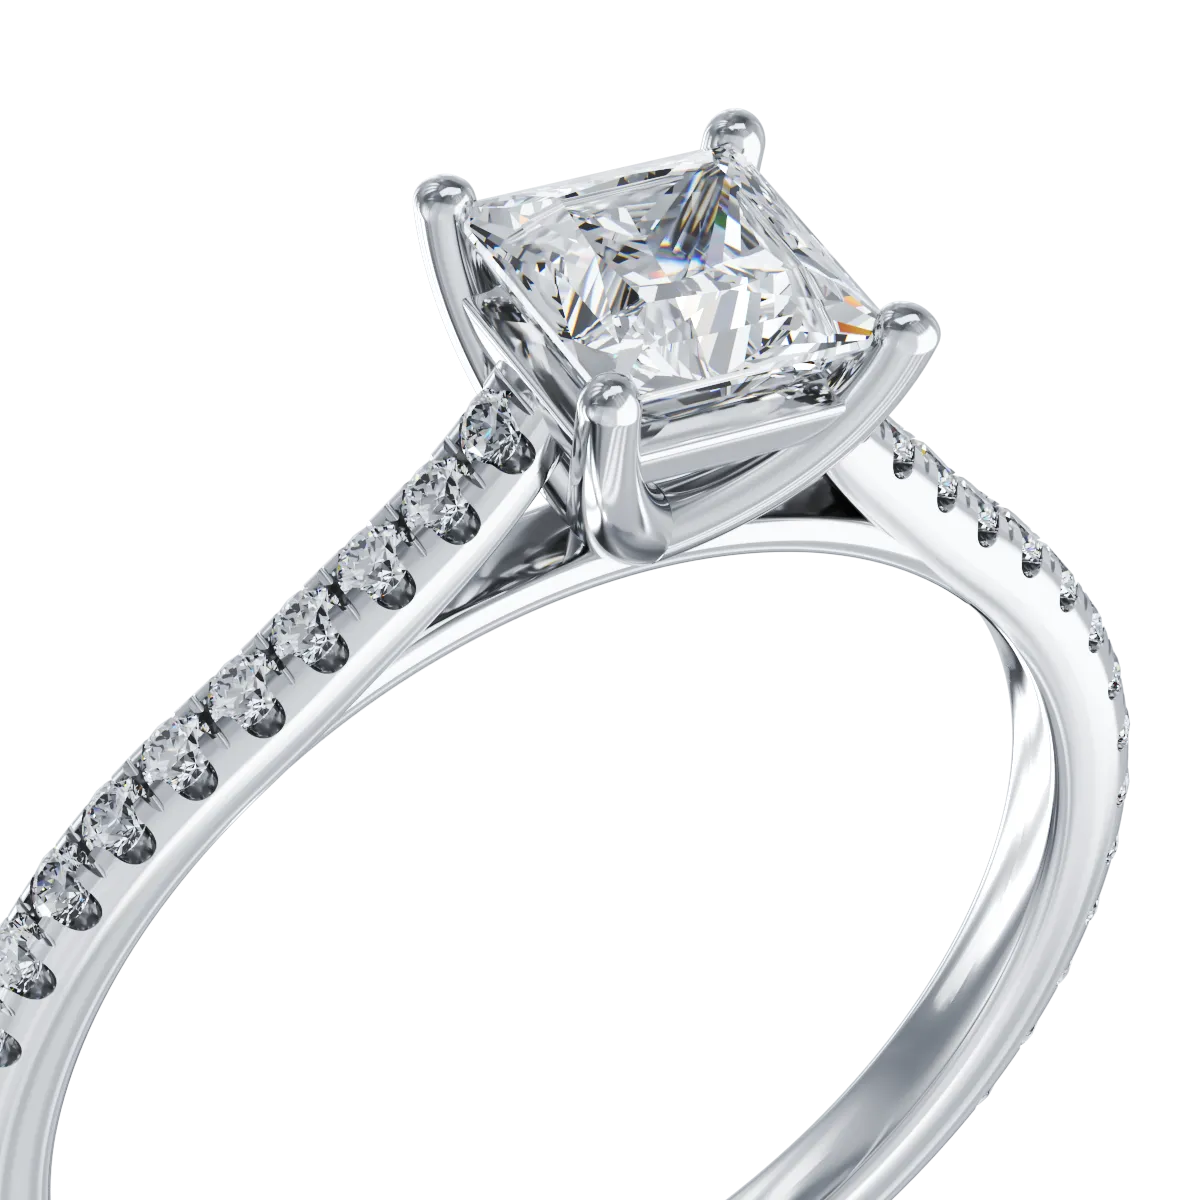 18K white gold engagement ring with one 0.6ct diamond and 0.178ct diamonds